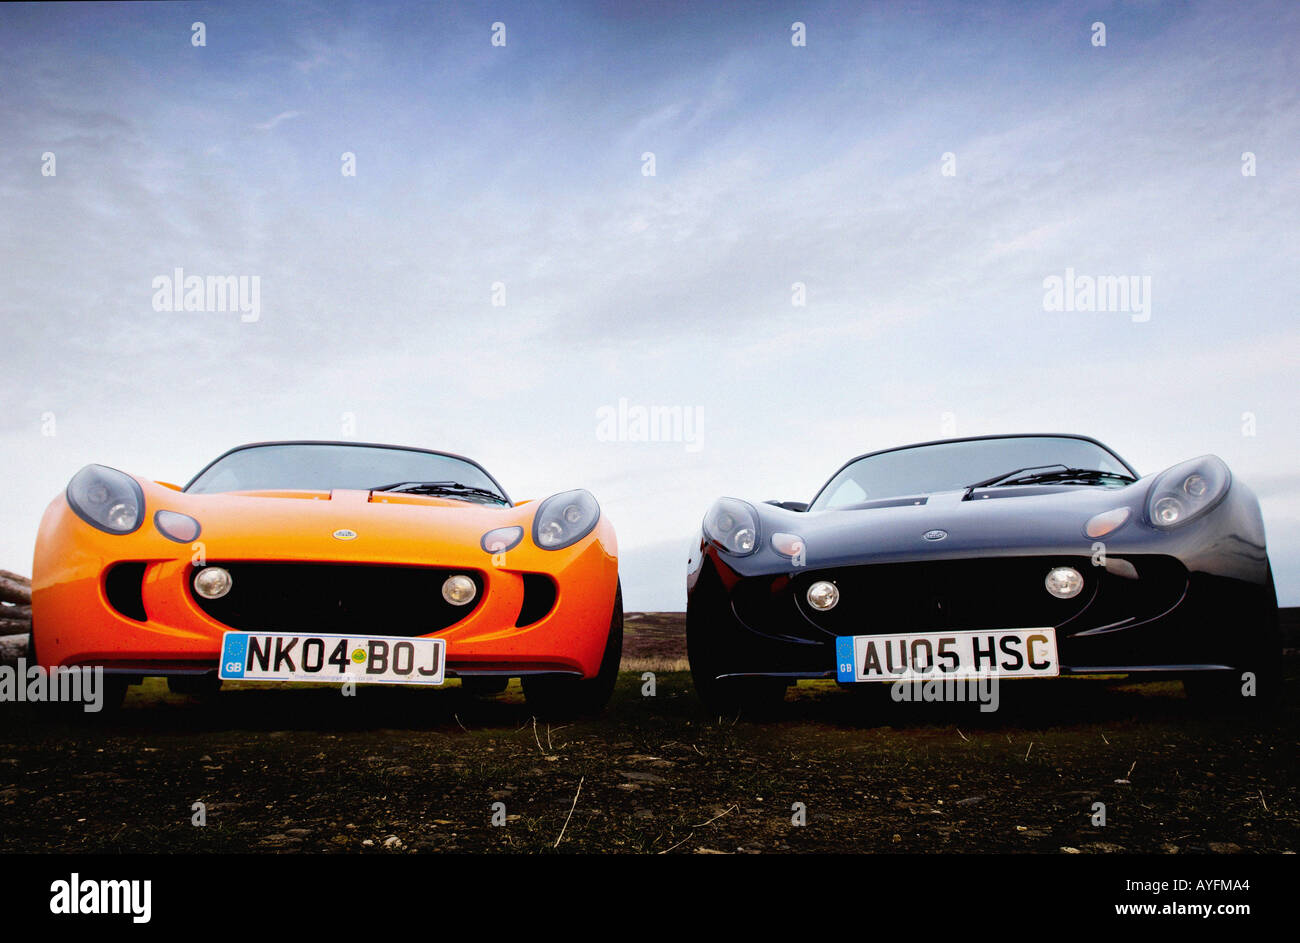 Two Lotus Exige cars, one orange and one black parked side by side with the dramatic scenery of the North Yorkshire Moors in the distance. Stock Photo